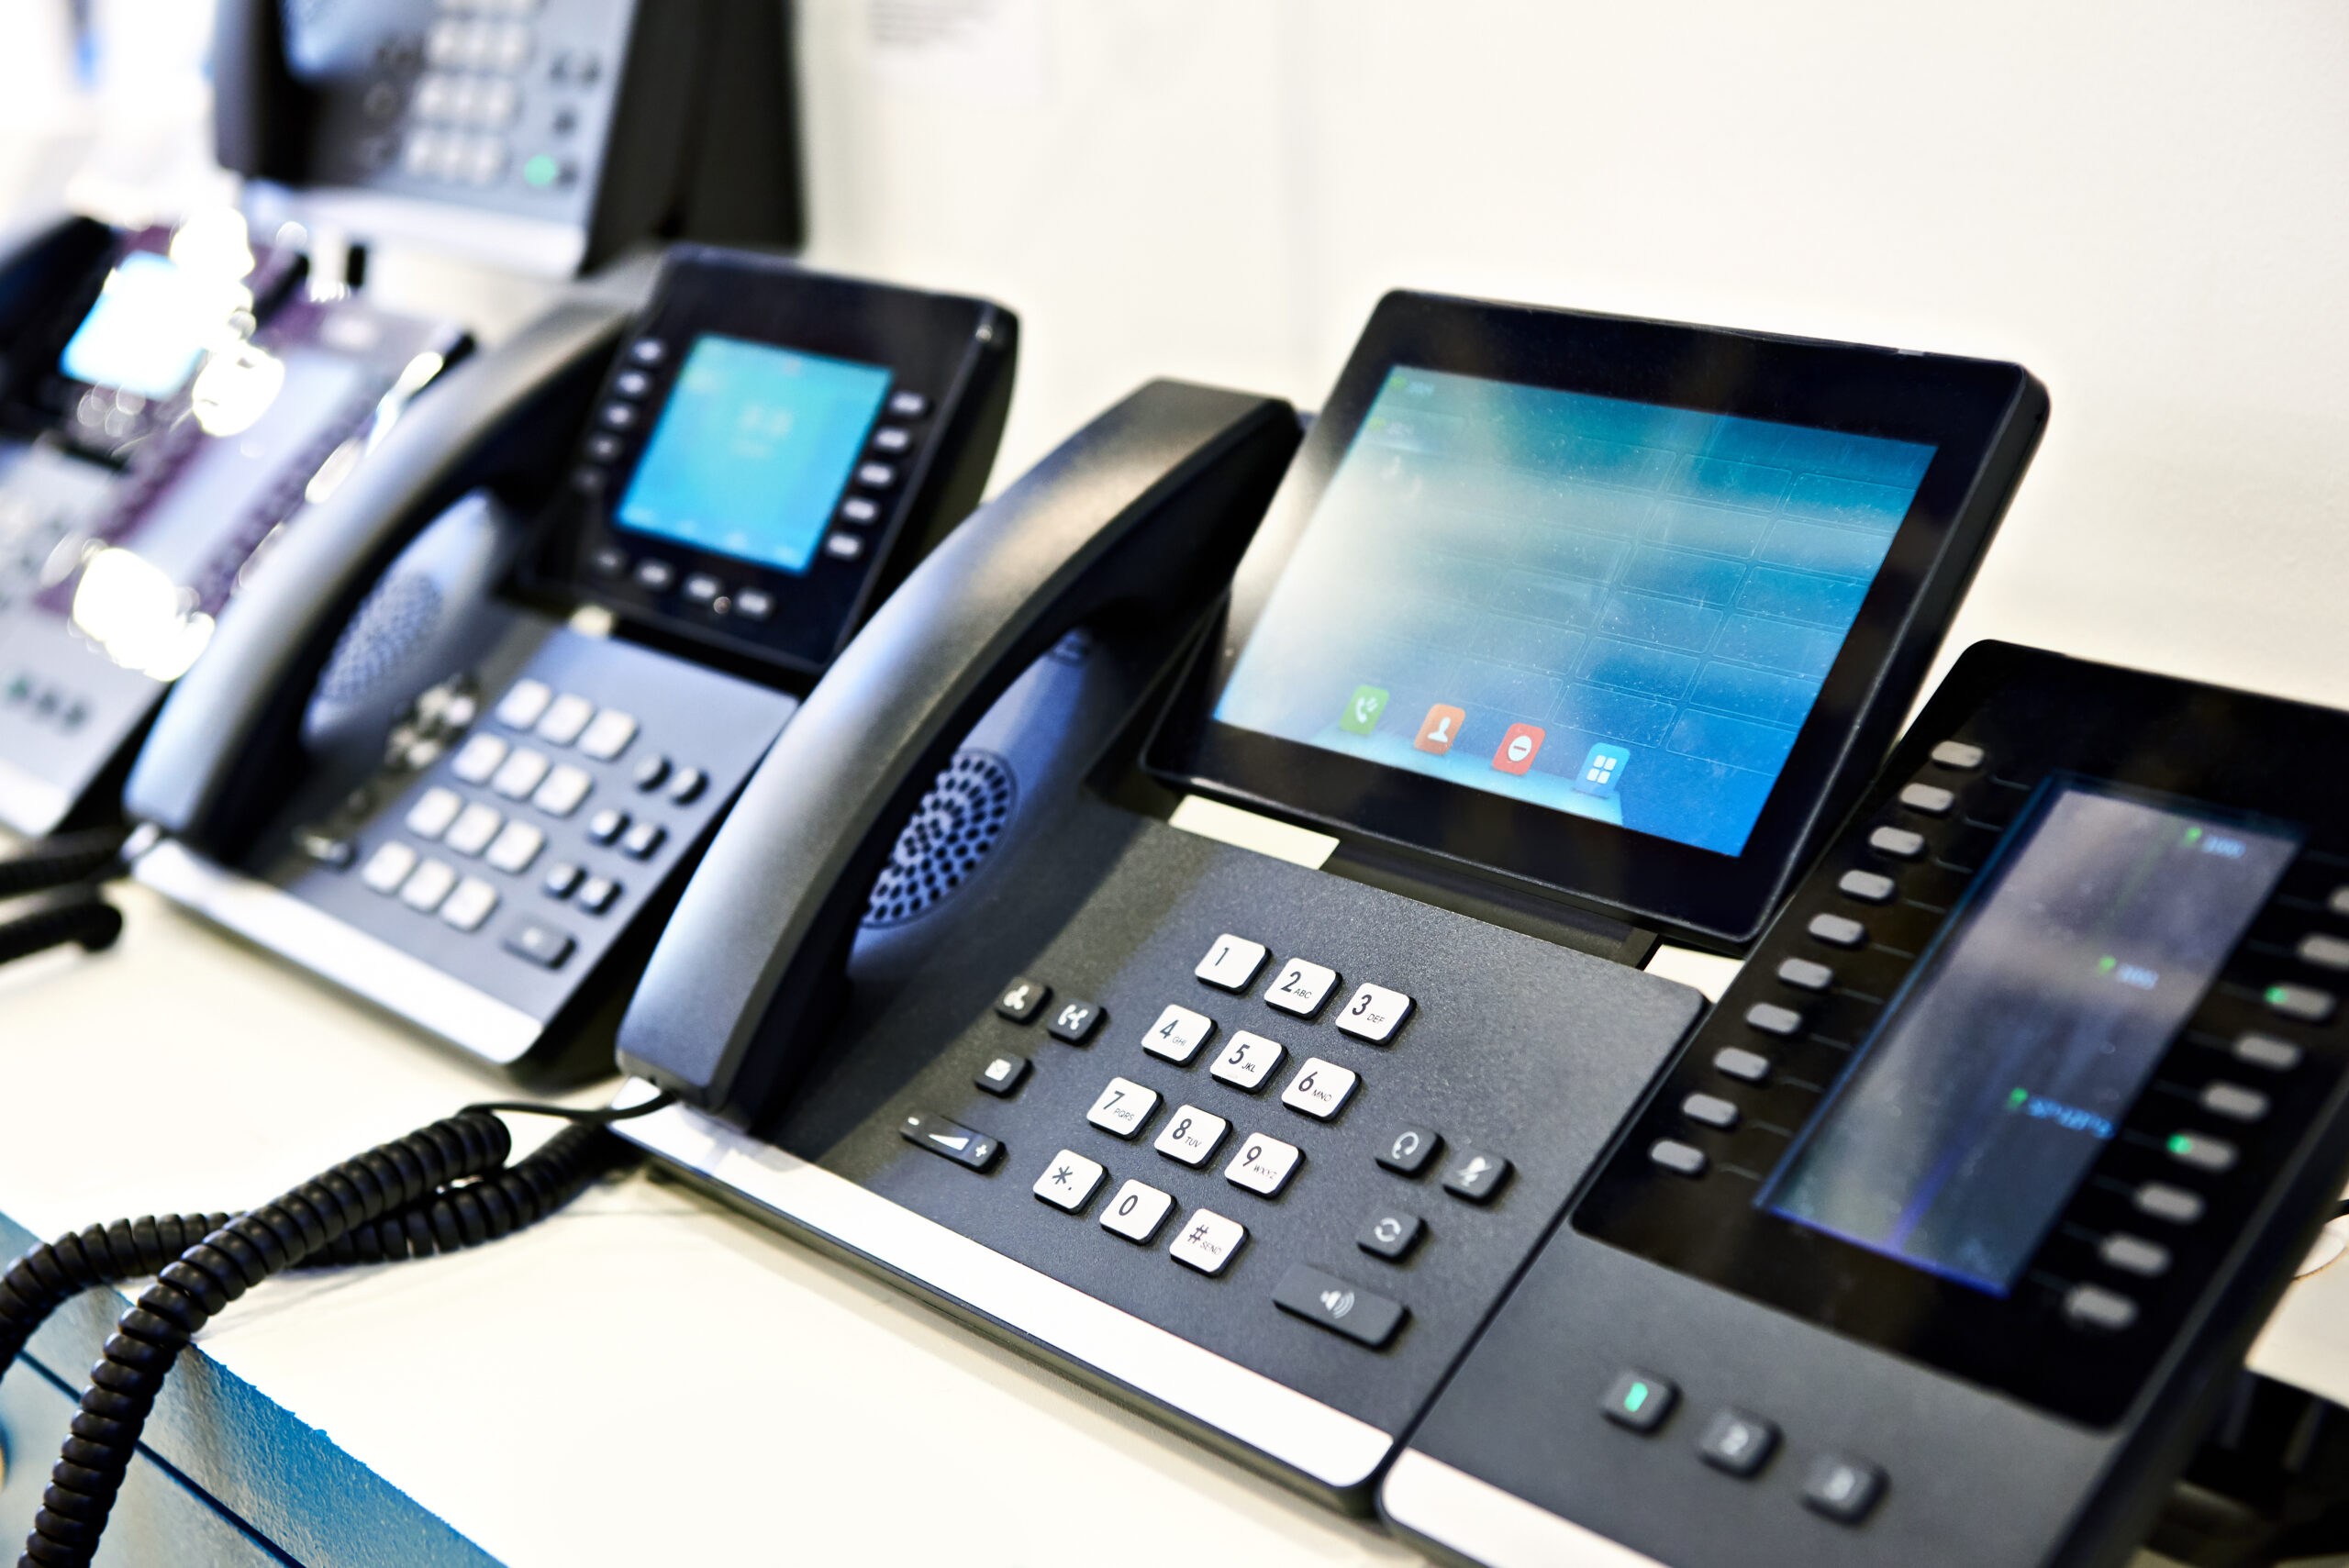 Office phones at the exhibition